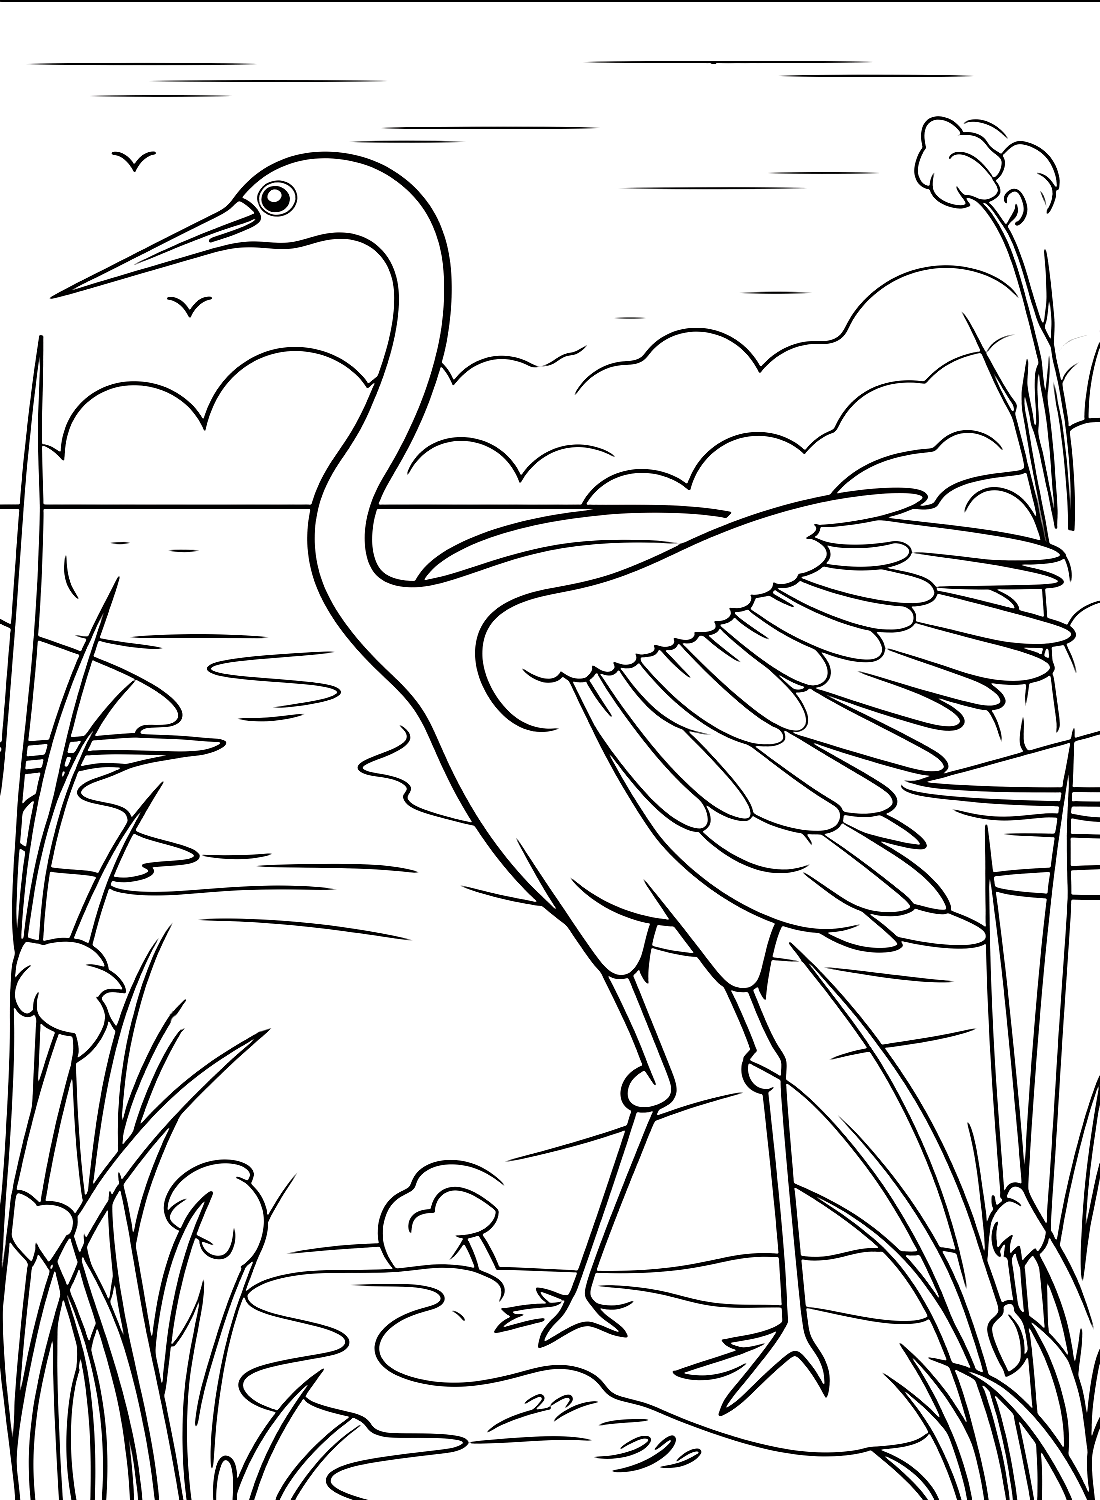 Crane Bird go Hunting Coloring Page - Free Printable Coloring Pages